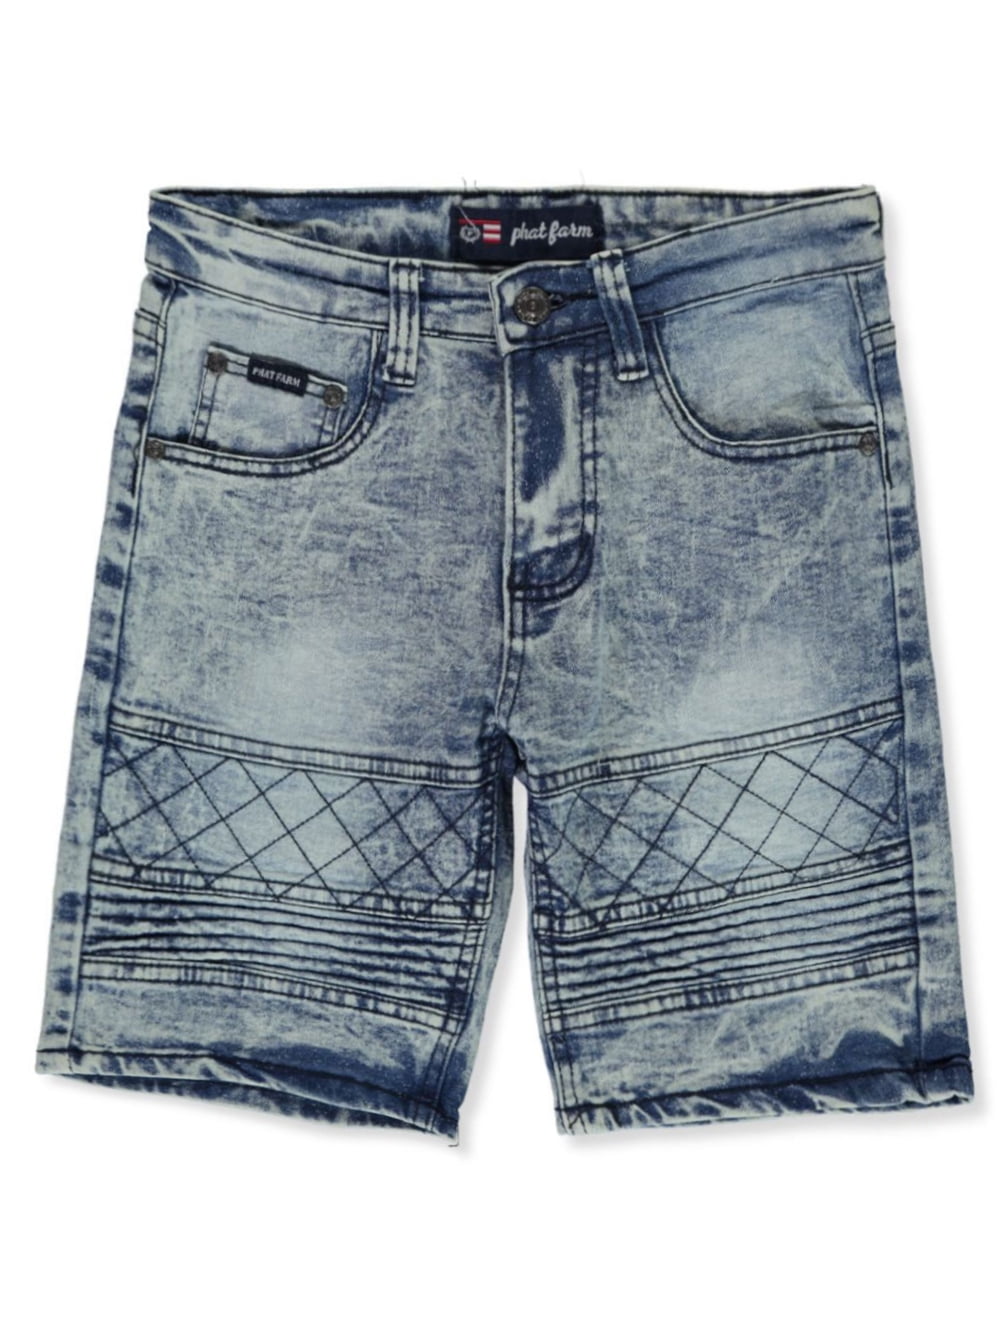 caio freire recommends phat farm jean shorts pic